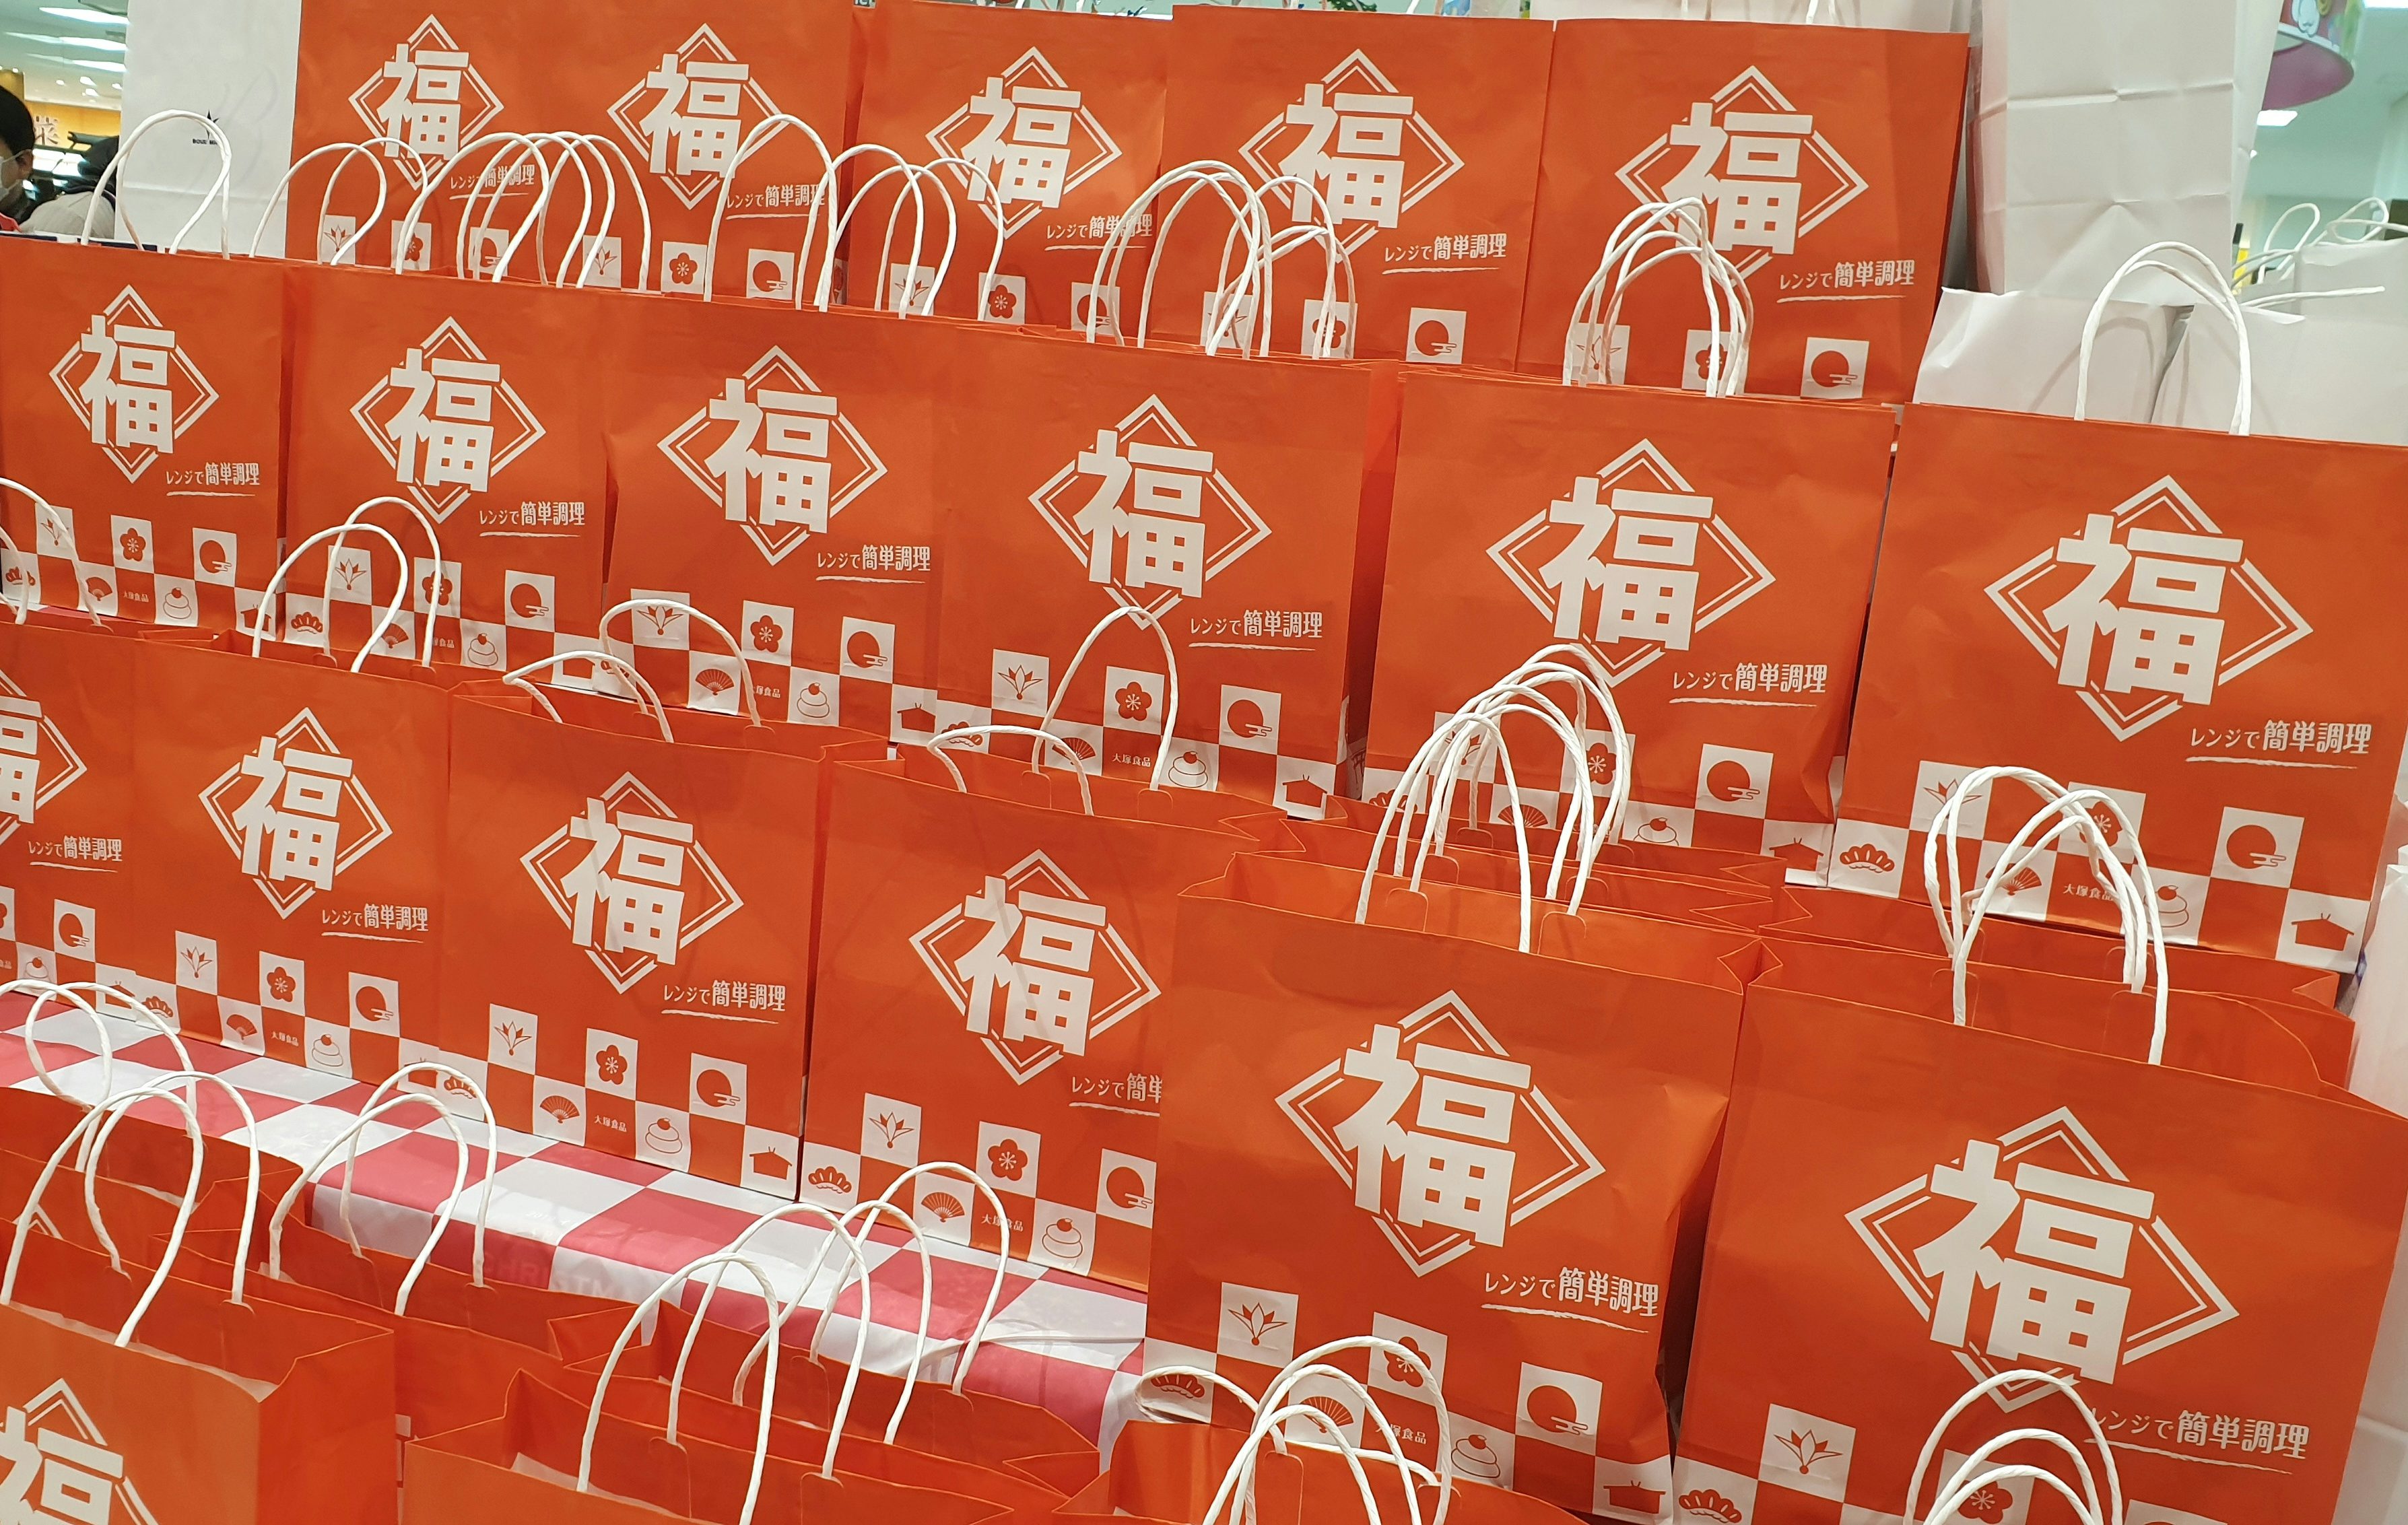 Lucky bags, Fukubukuro in Japanese, lined up at a shop in Japan for New Year's Sale, in December, 2019. Shutterstock.